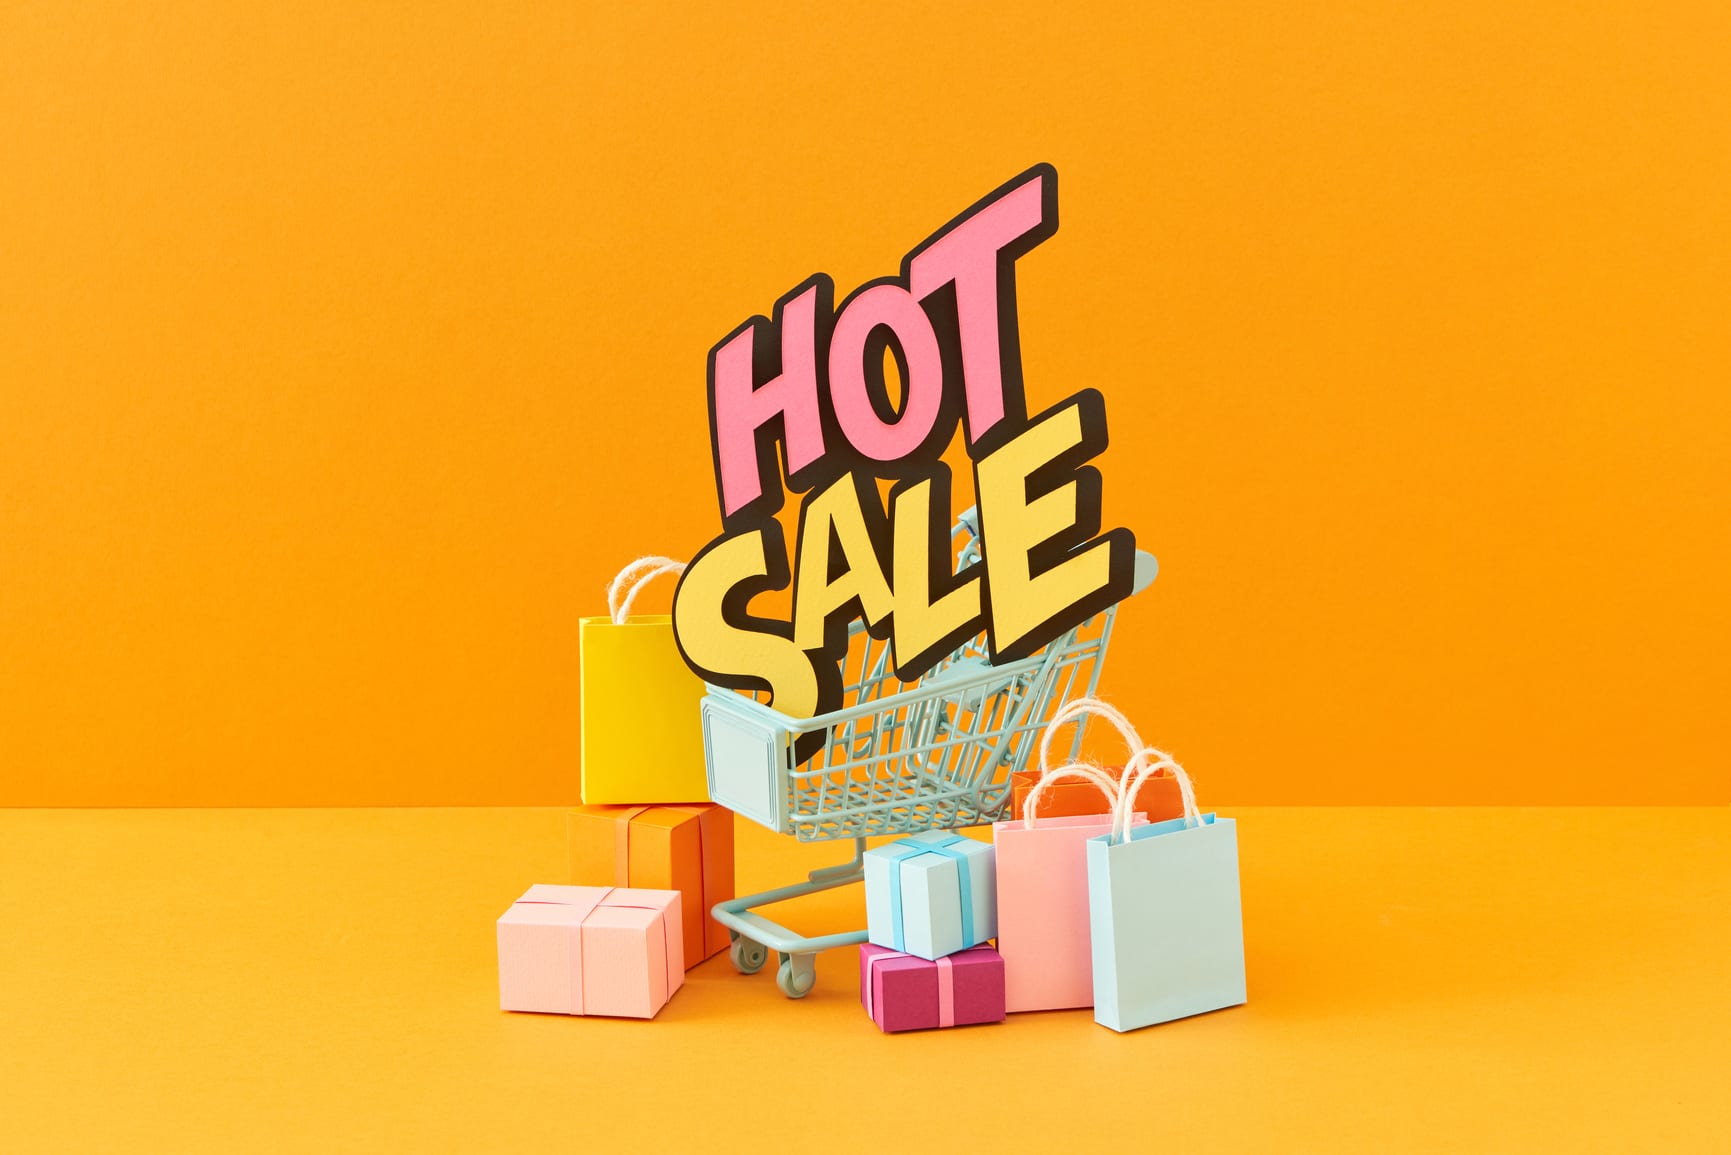 Abstract design element, annual sale, shopping season concept, mini cart with colorful paper bag and word HOT DEAL